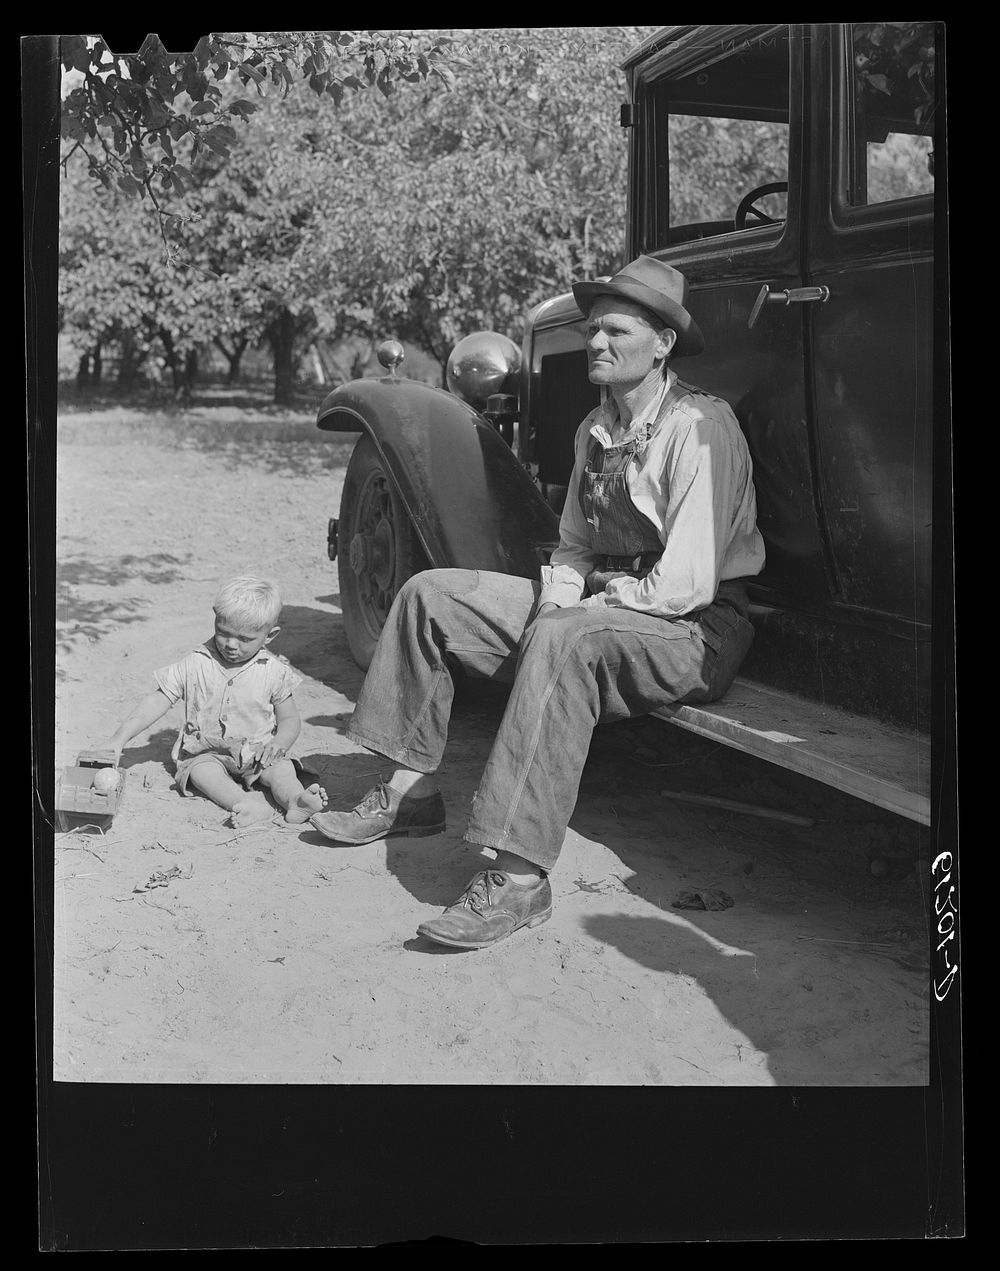 Migrant fruit worker from Arkansas. Berrien County, Michigan. Sourced from the Library of Congress.